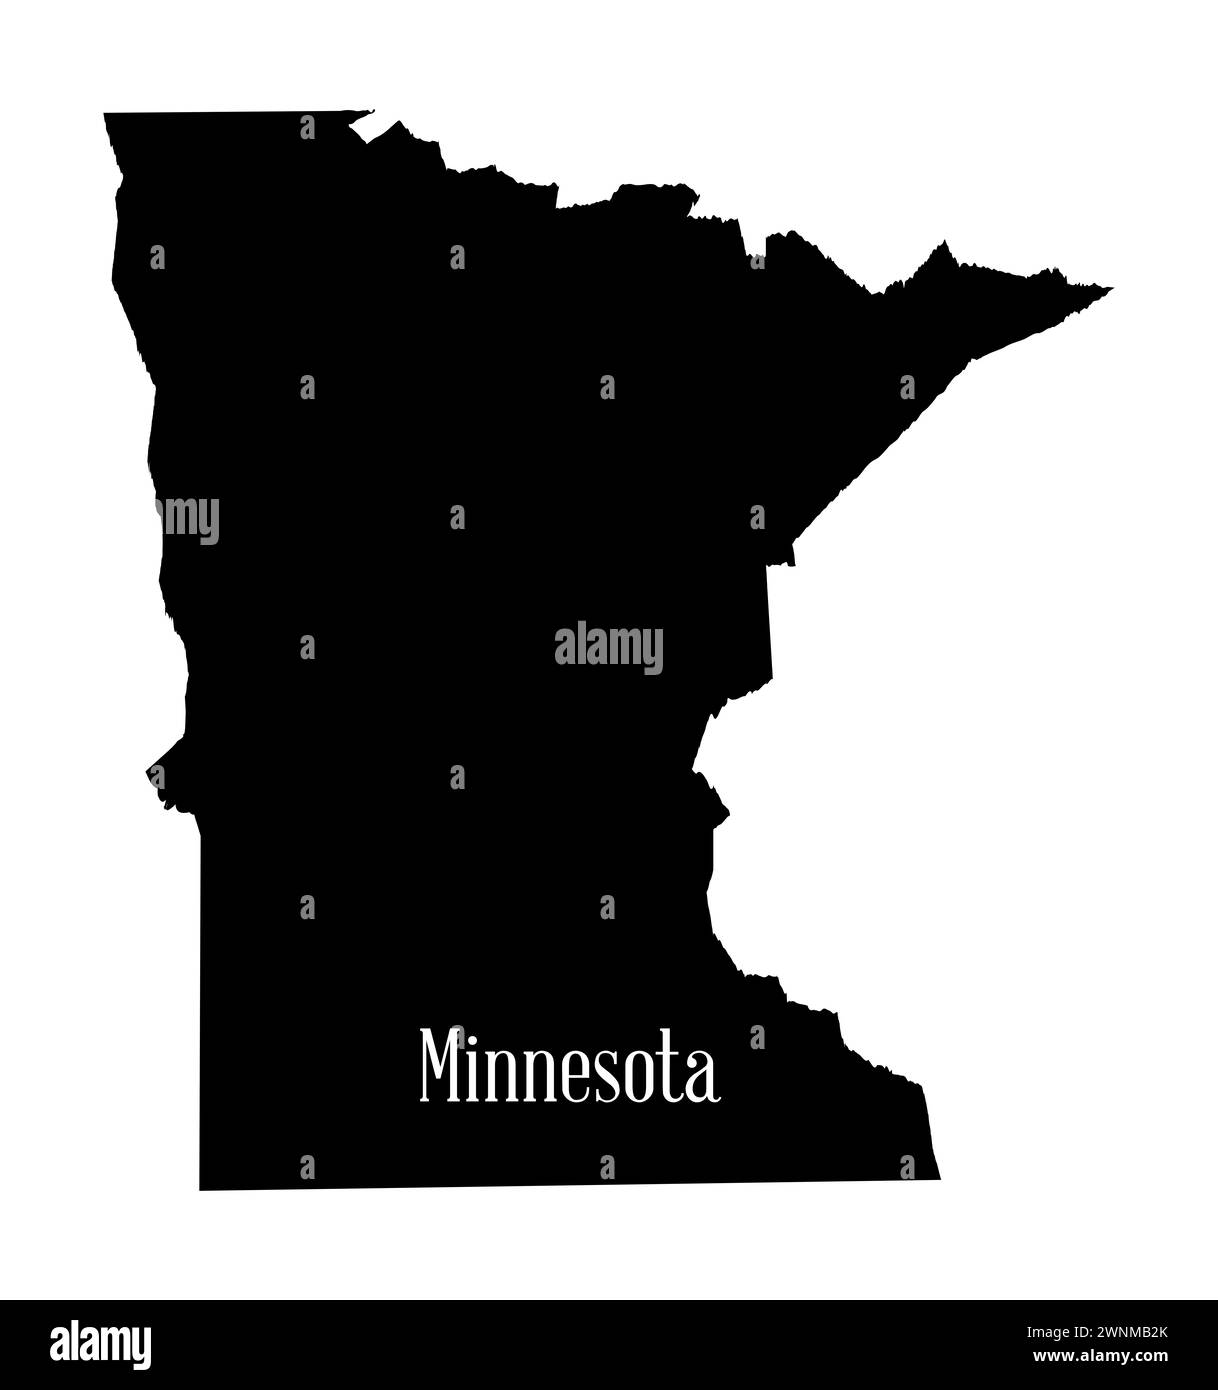 An outline silhouette map of Minnesota state isolated on a white background Stock Photo